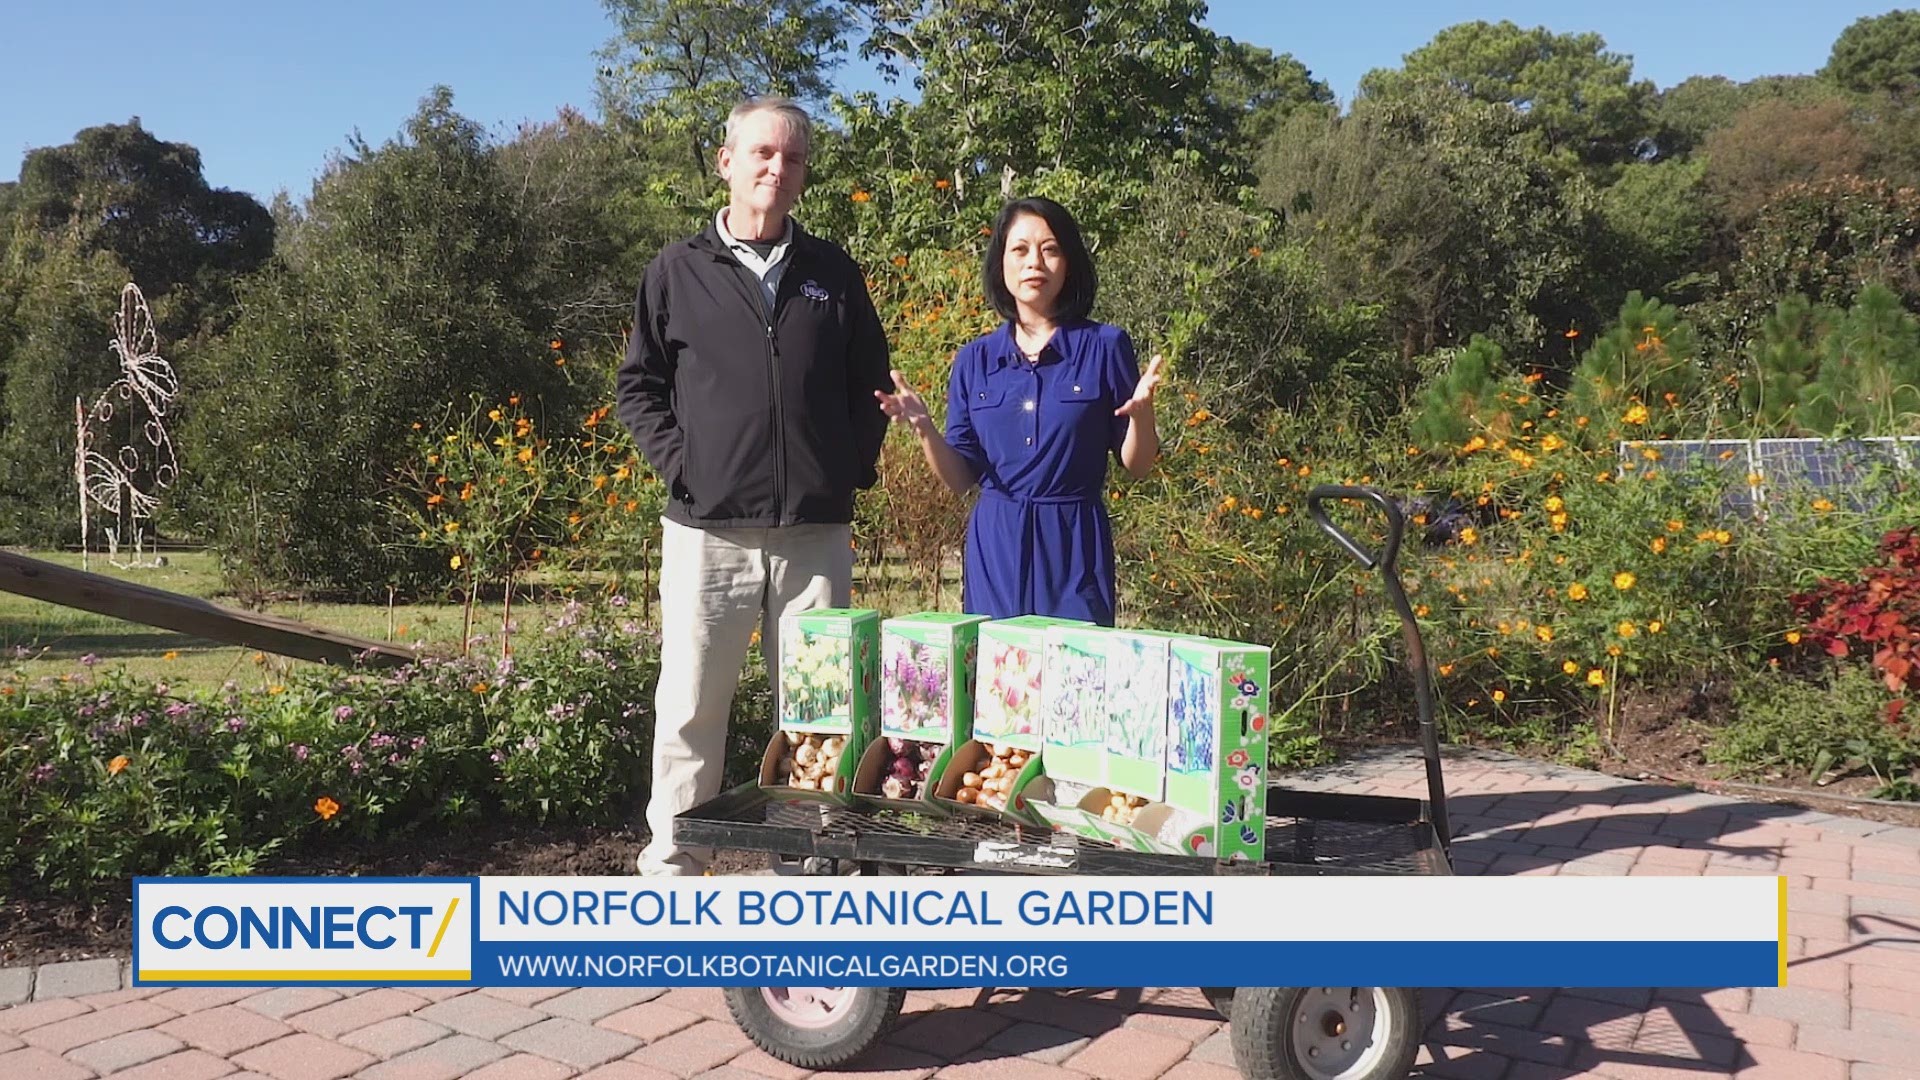 The time to start working your spring flowers is now! Norfolk Botanical Garden gave us time tips, and told us how they're preparing for next spring.